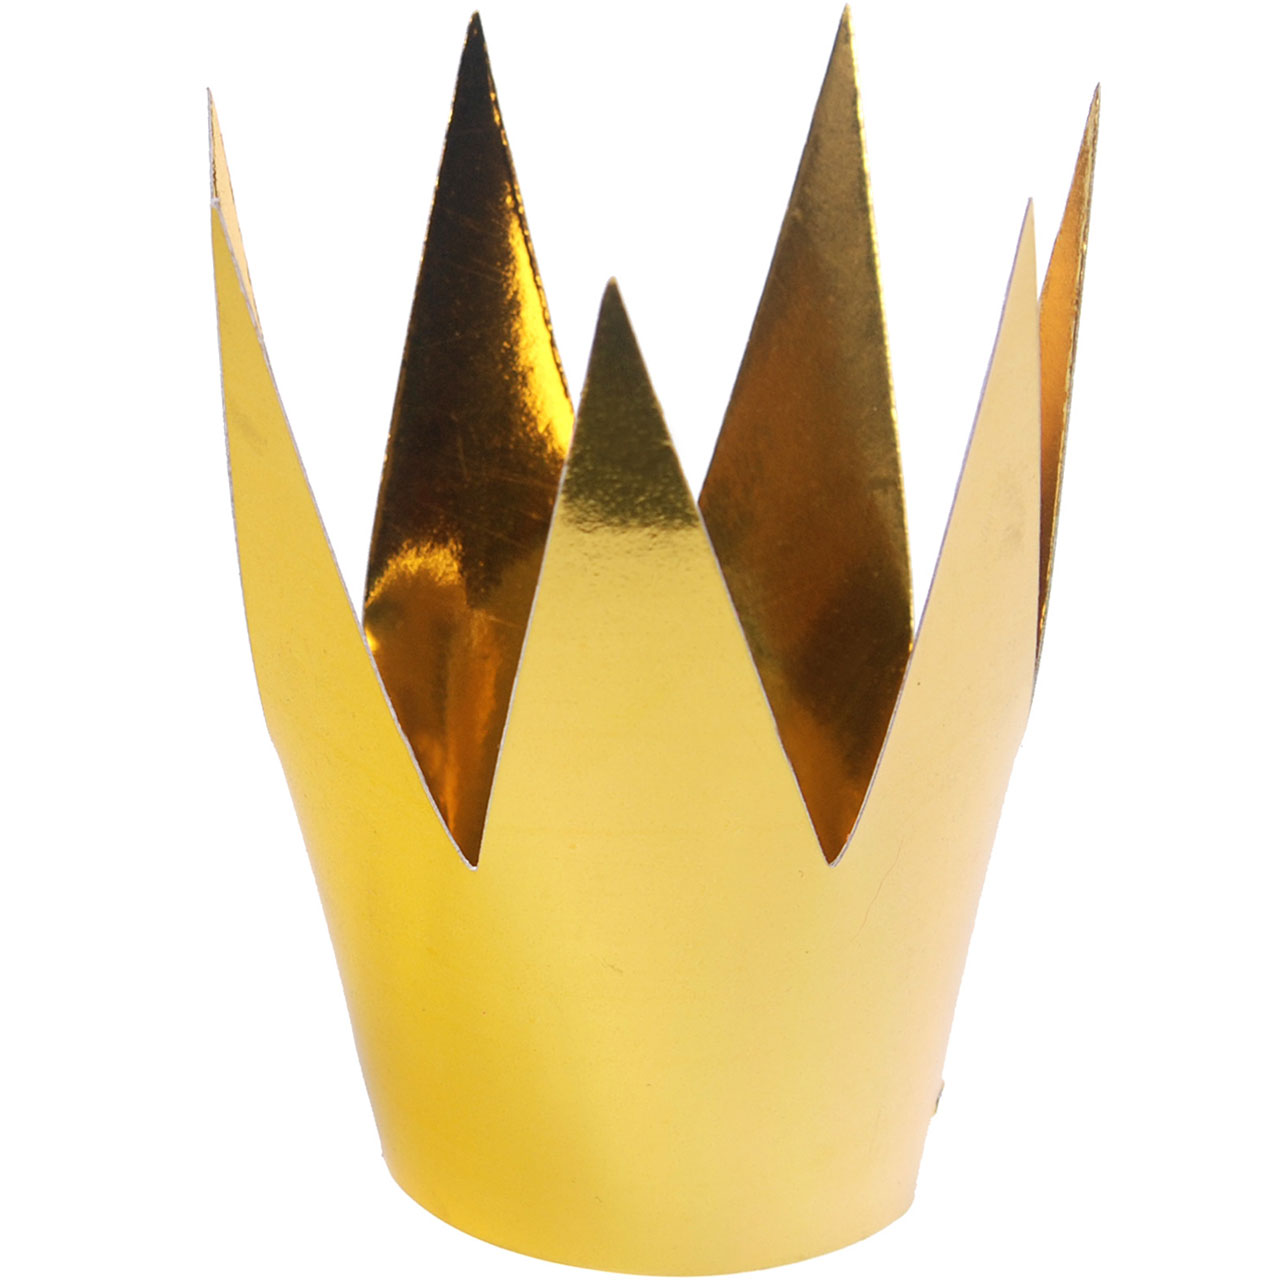 3 Gold Party Crowns